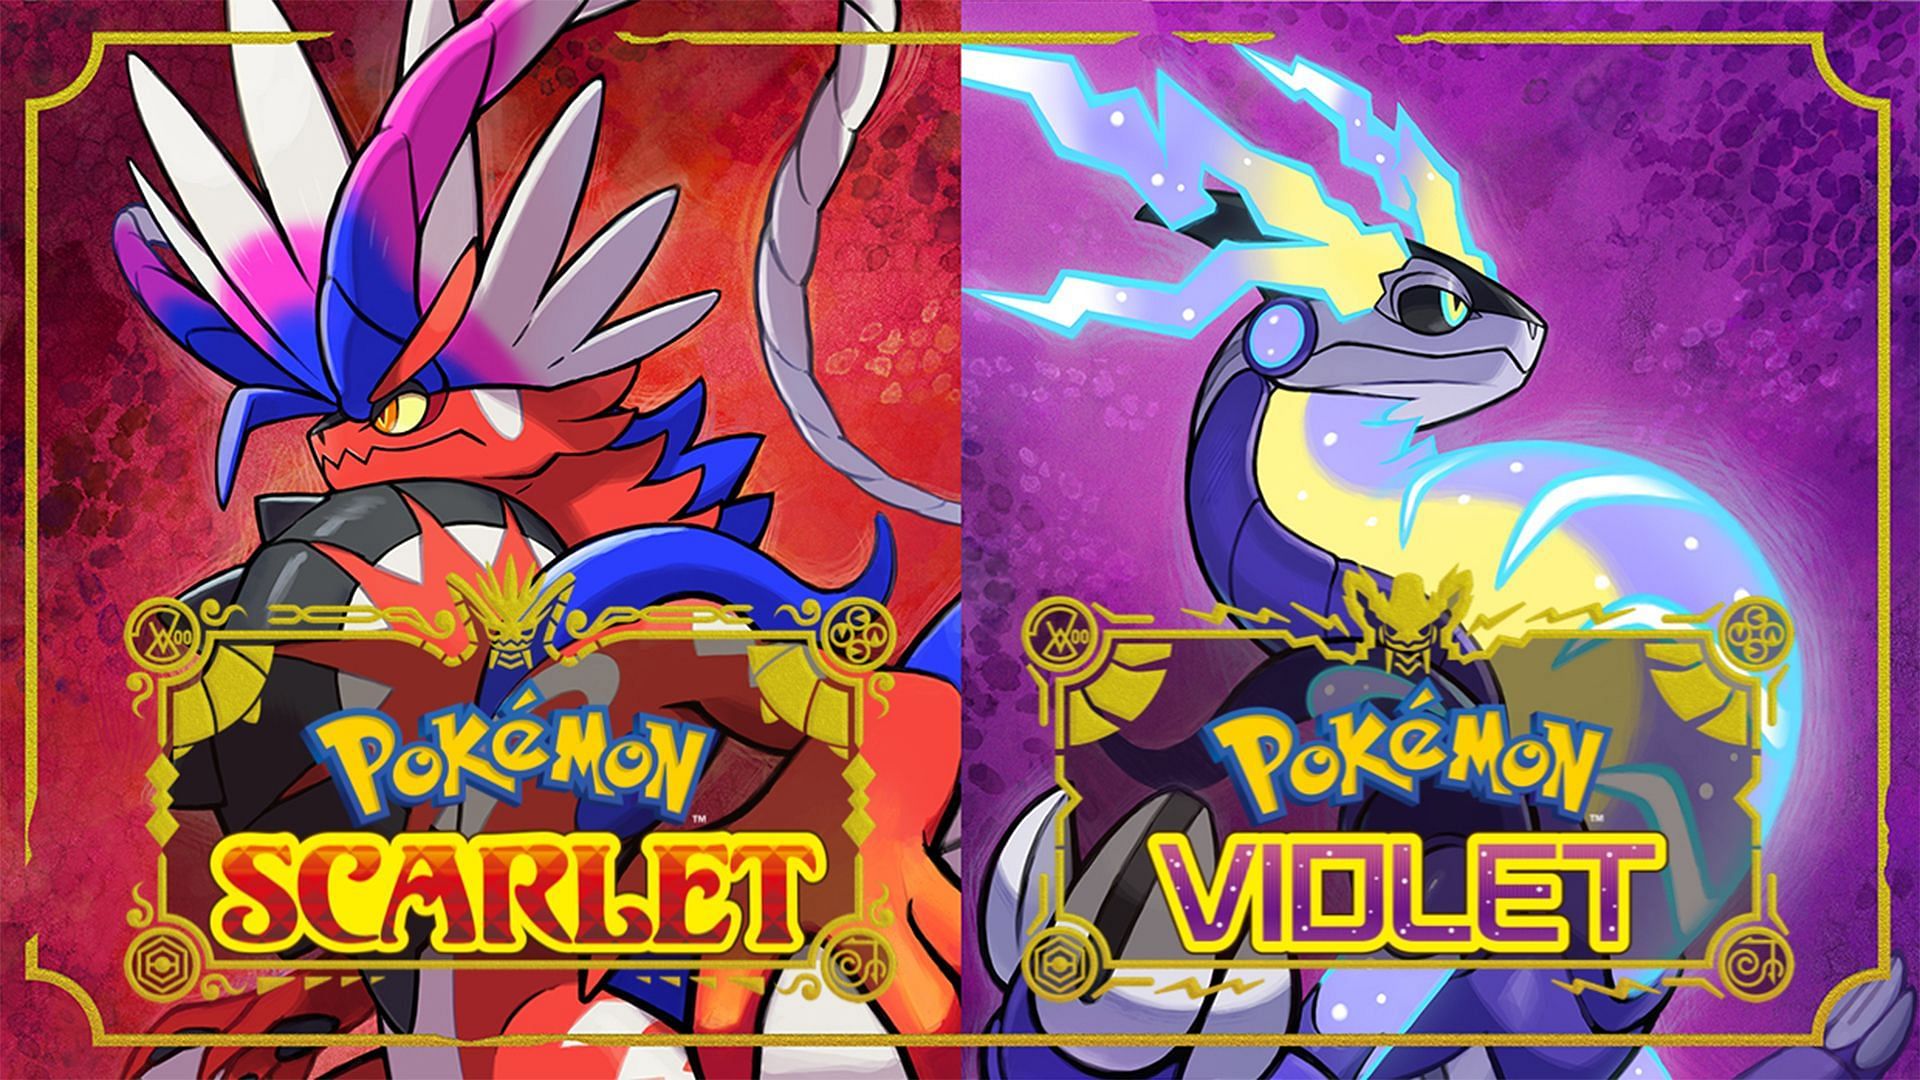 Pokemon Scarlet and Violet cover image for the game (Image via The Pokemon Company)